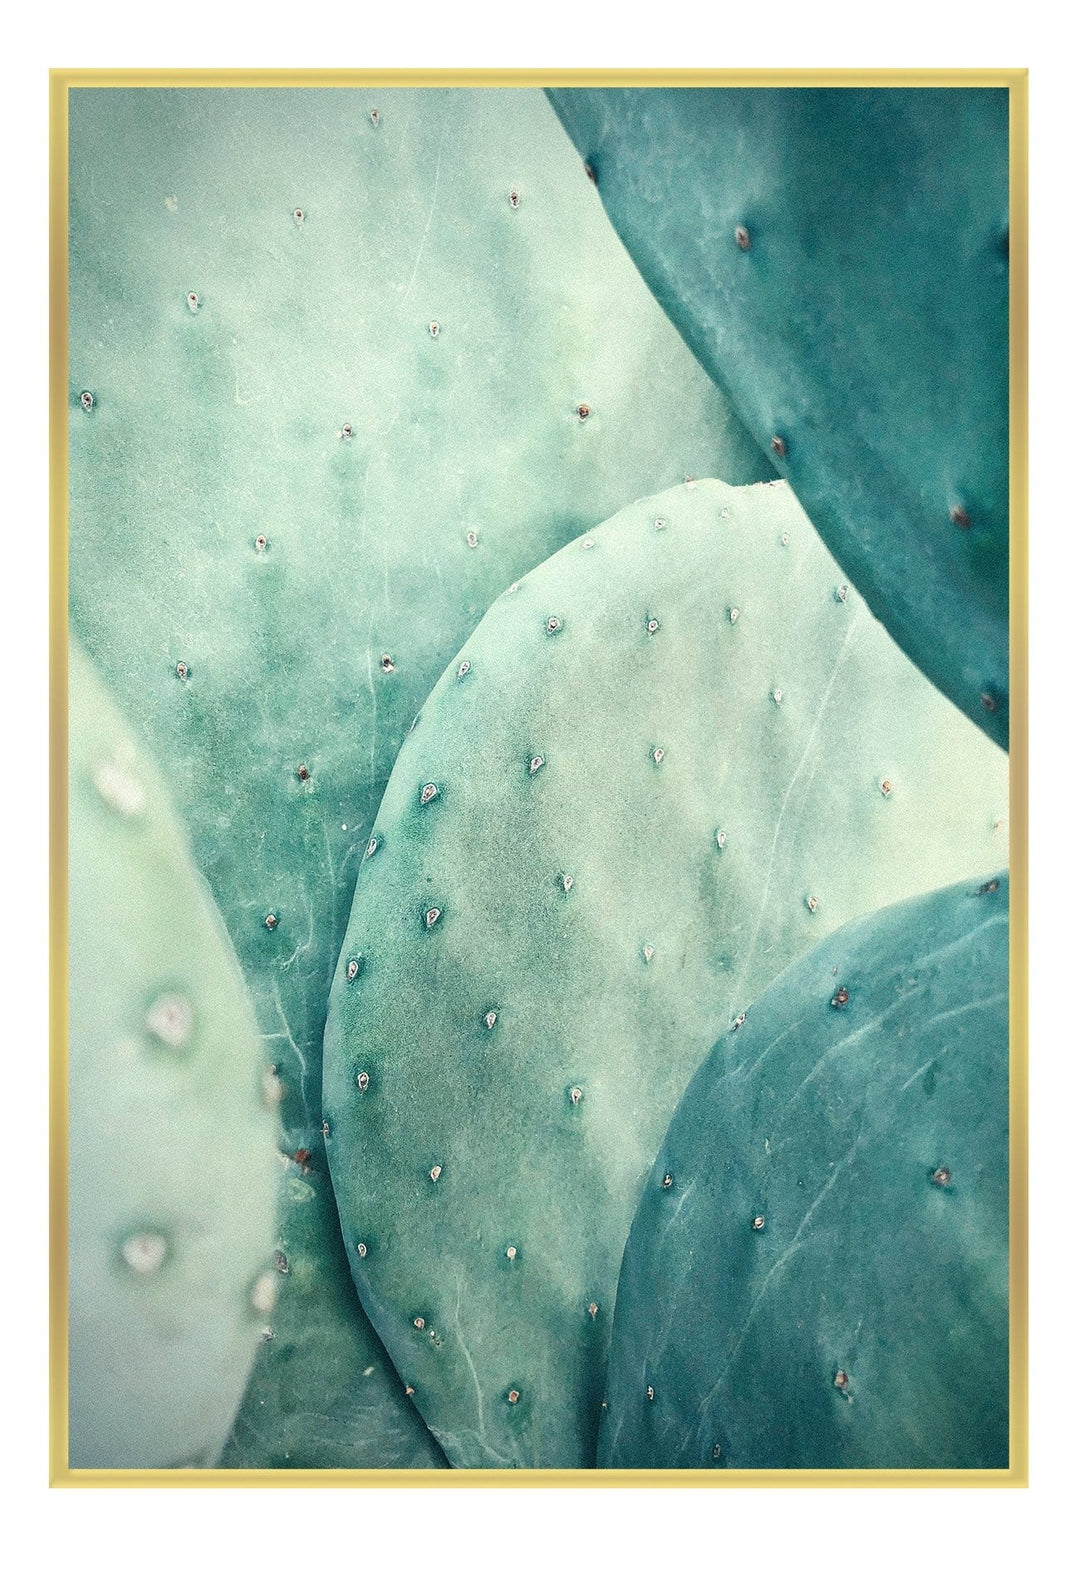 Canvas Print Small		50x70cm / Gold Cactus Cactus Wall Art : Ready to hang framed artwork. Brand